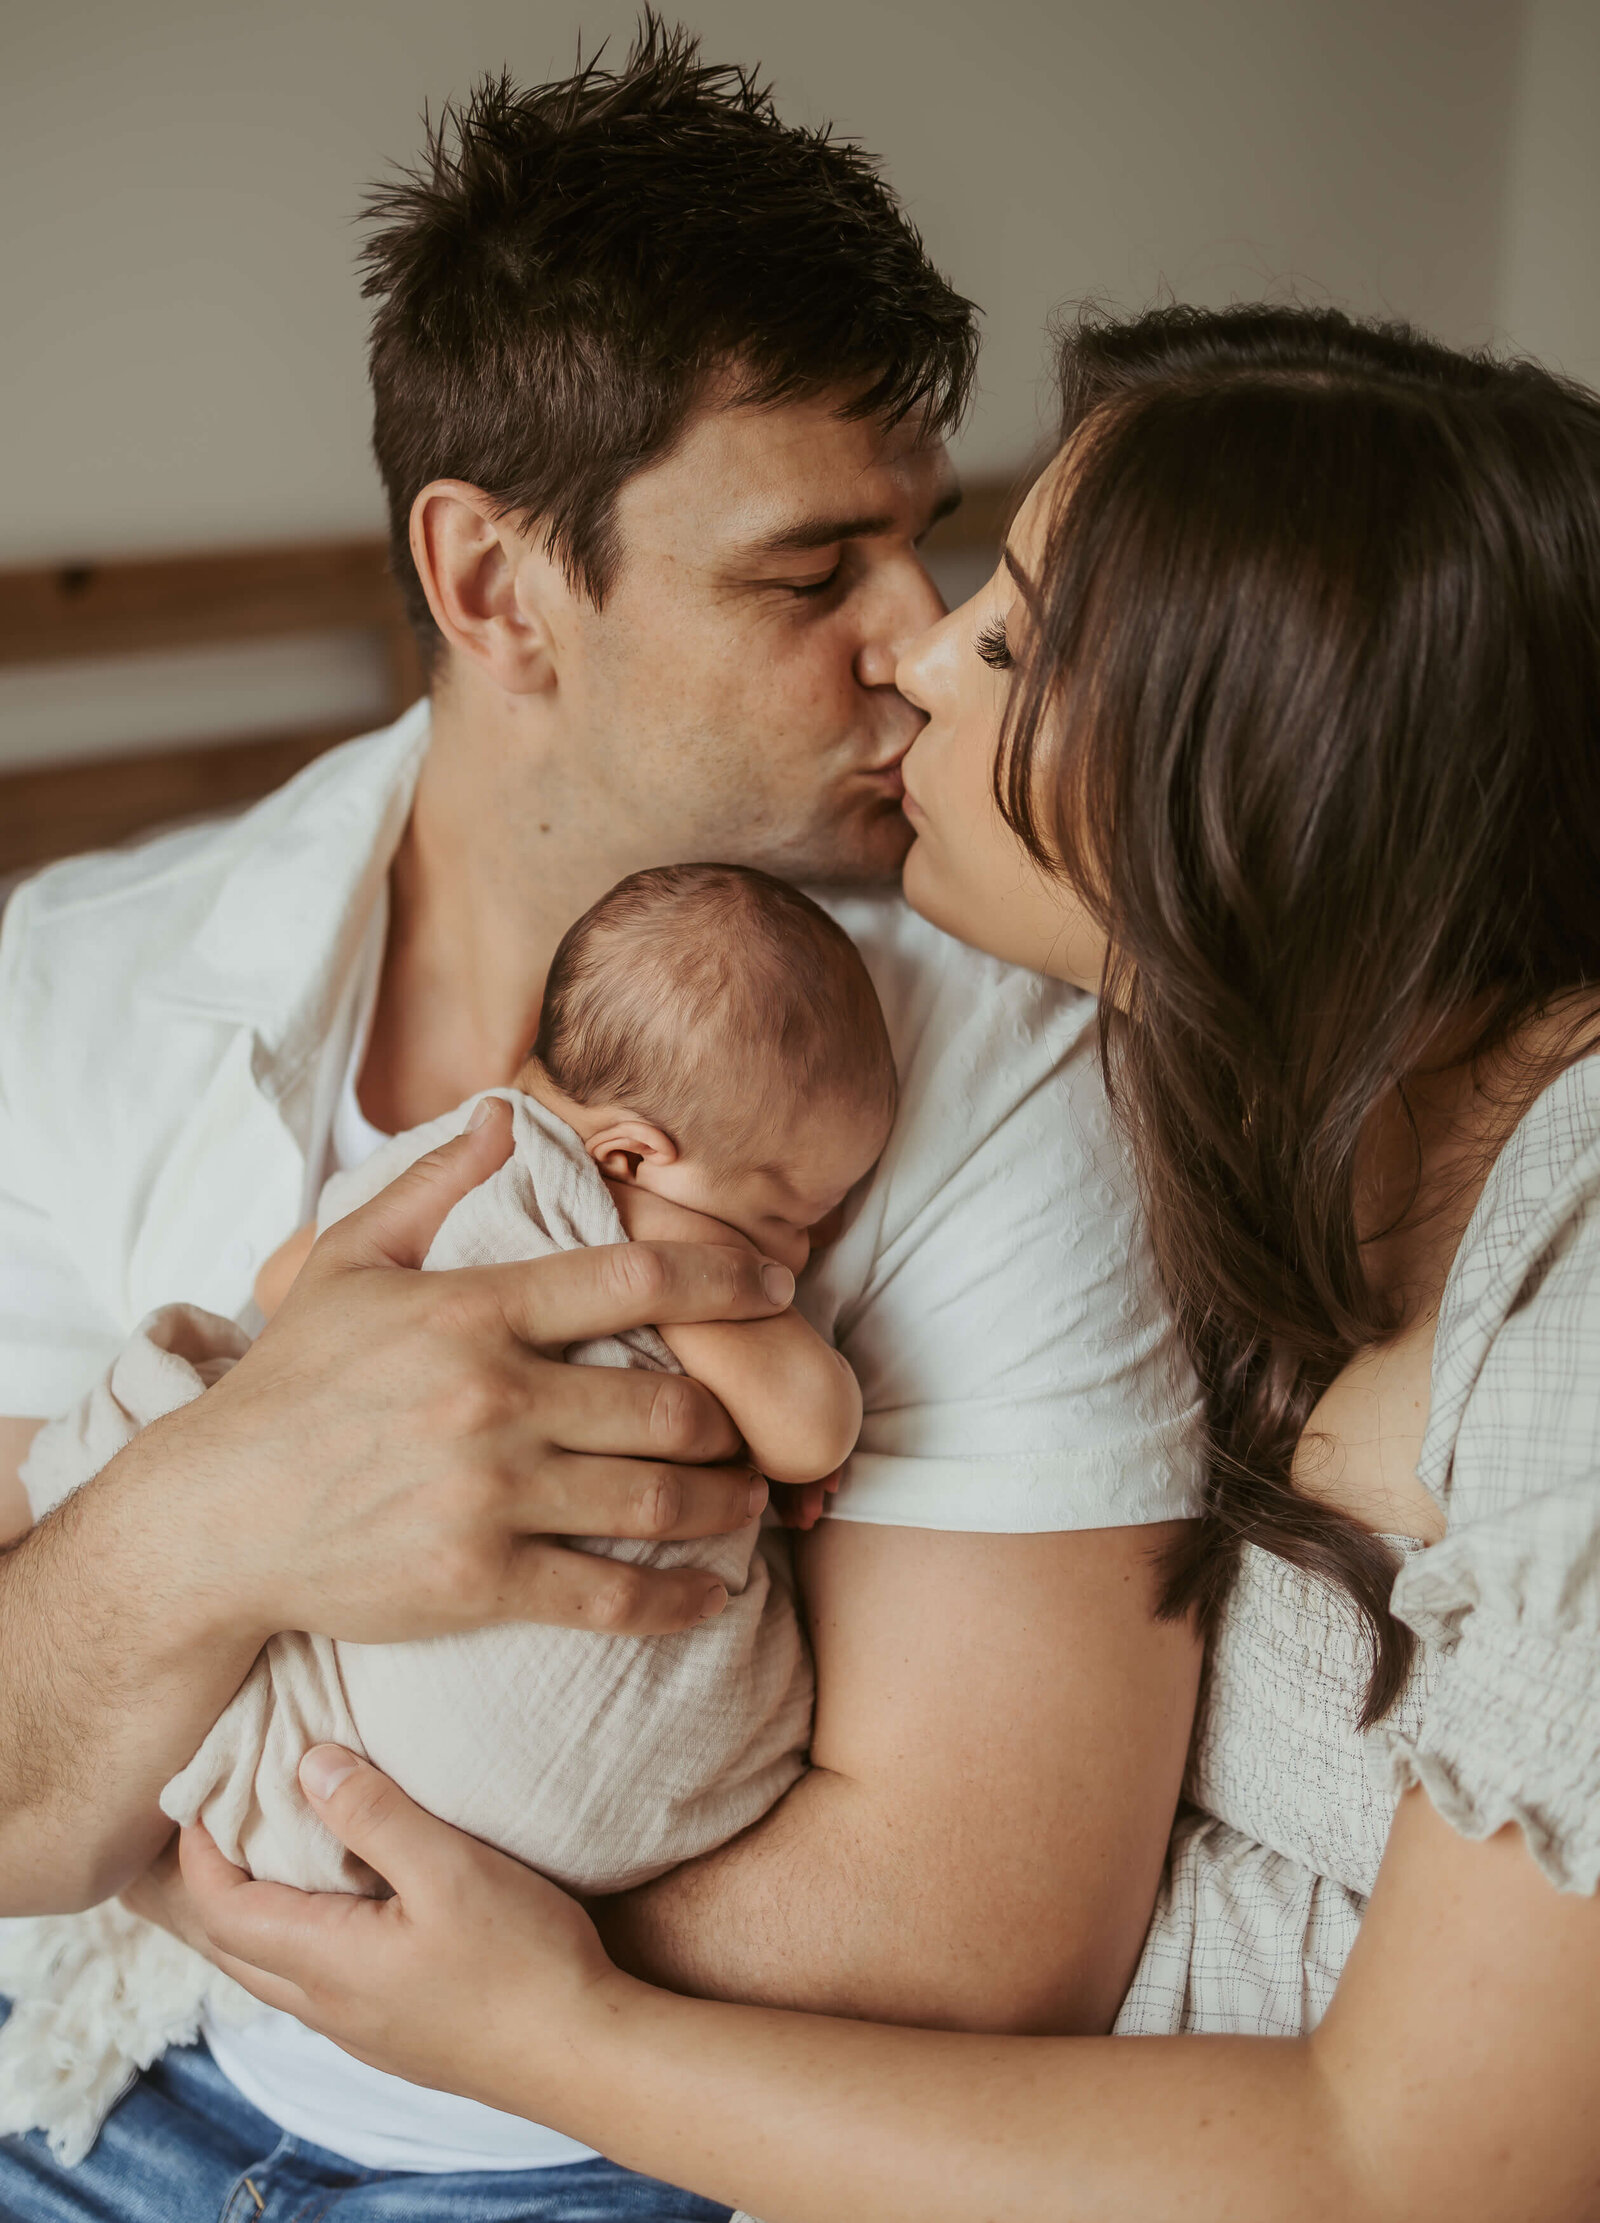 New parents are kissing while dad holds his new son upright on his chest while he's sleeping.